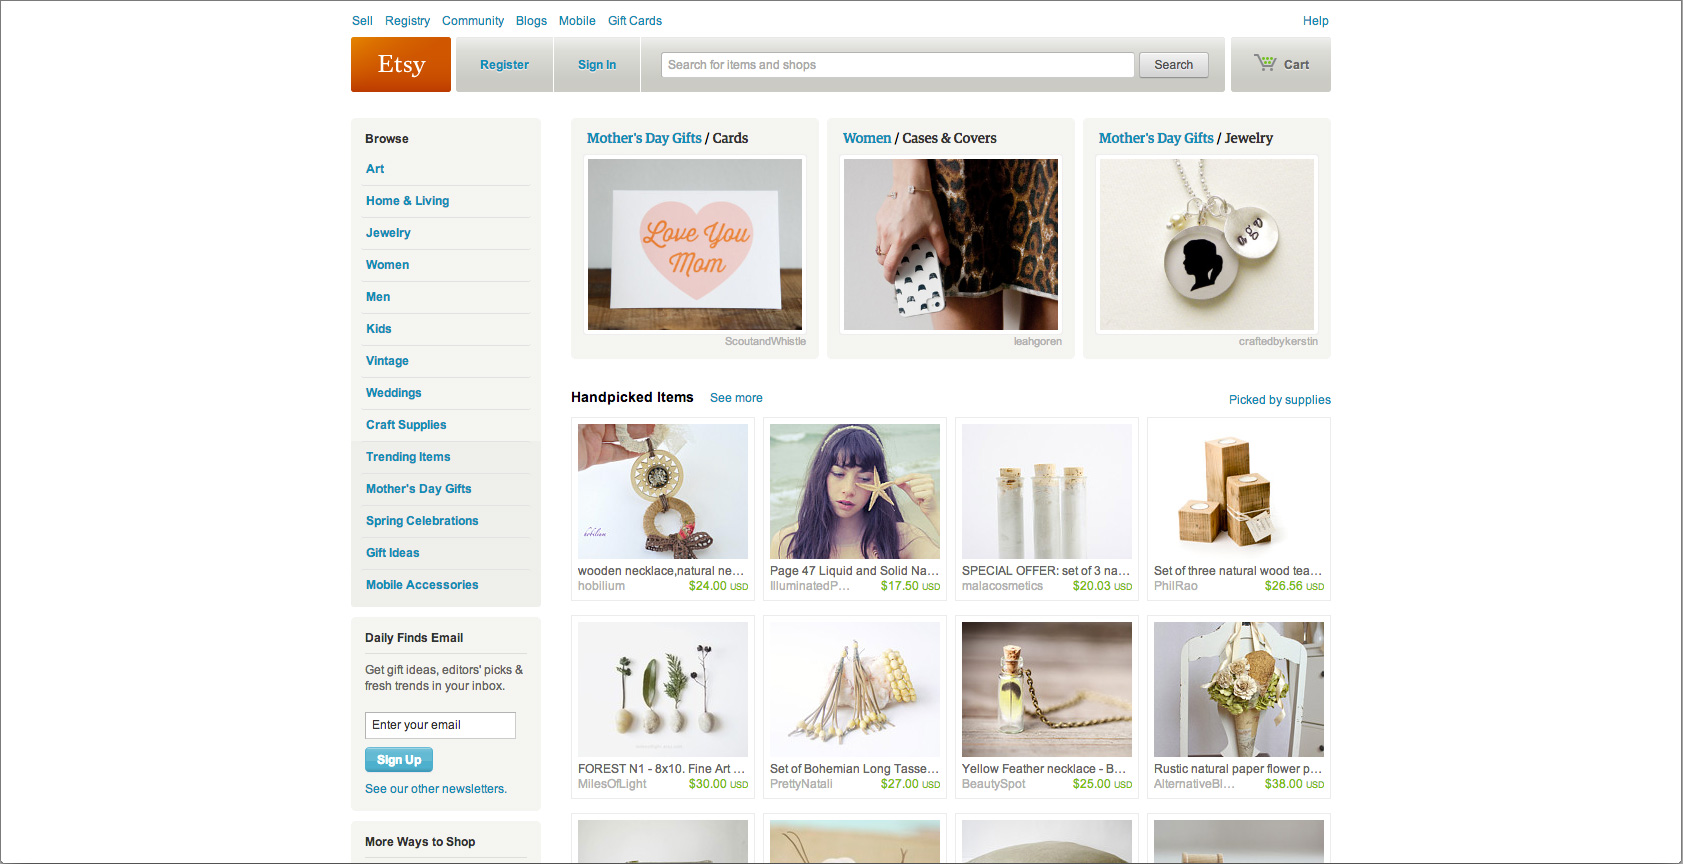 Etsy's Home Page